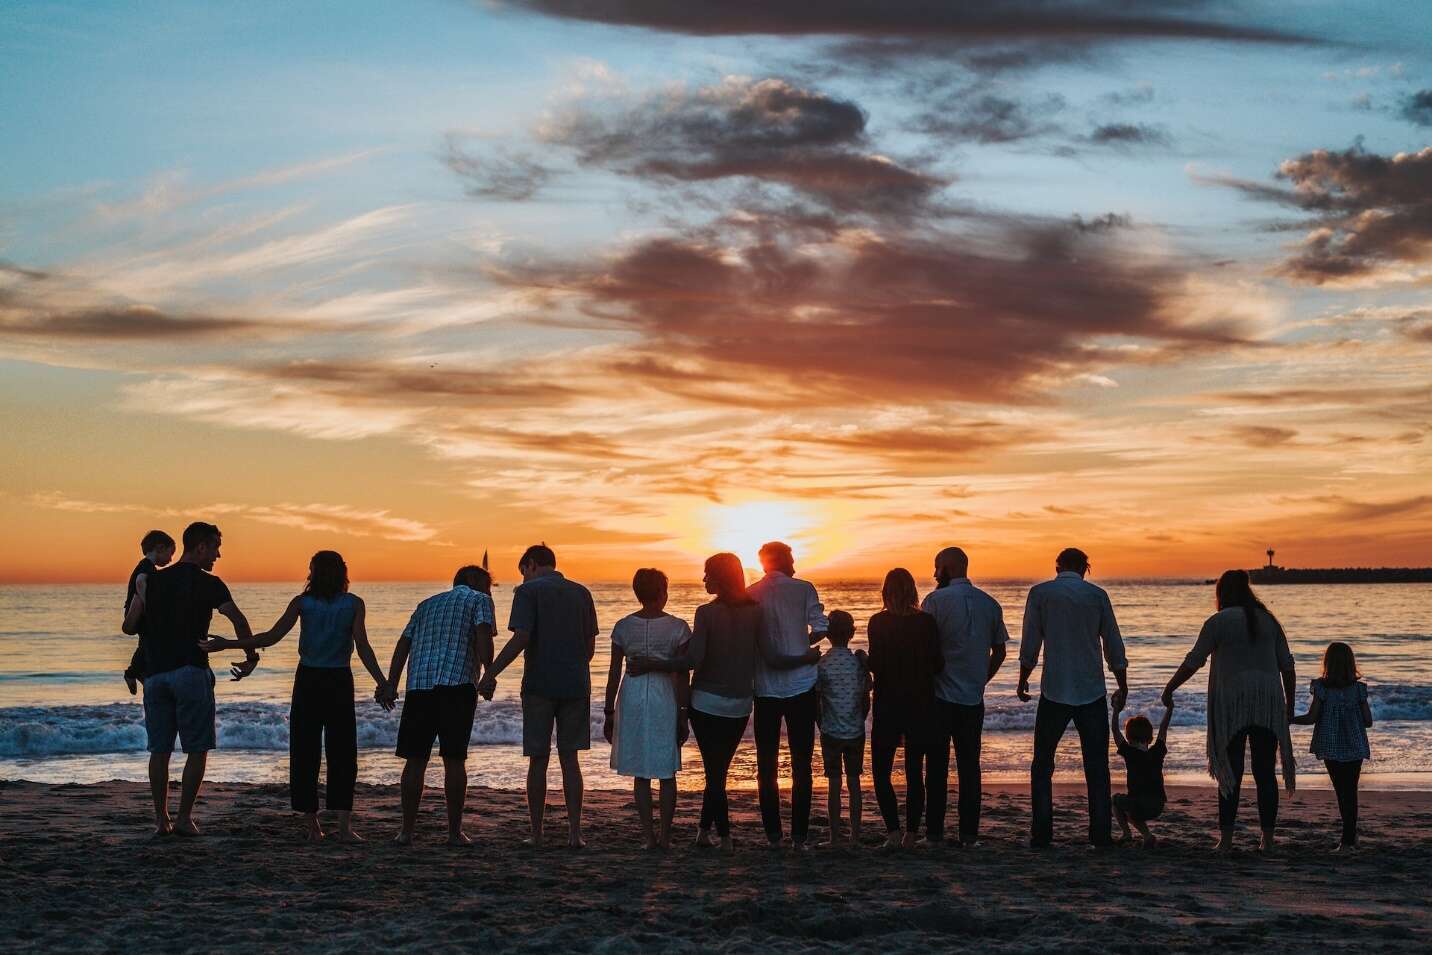 A group of people standing on a beach Description automatically generated with medium confidence